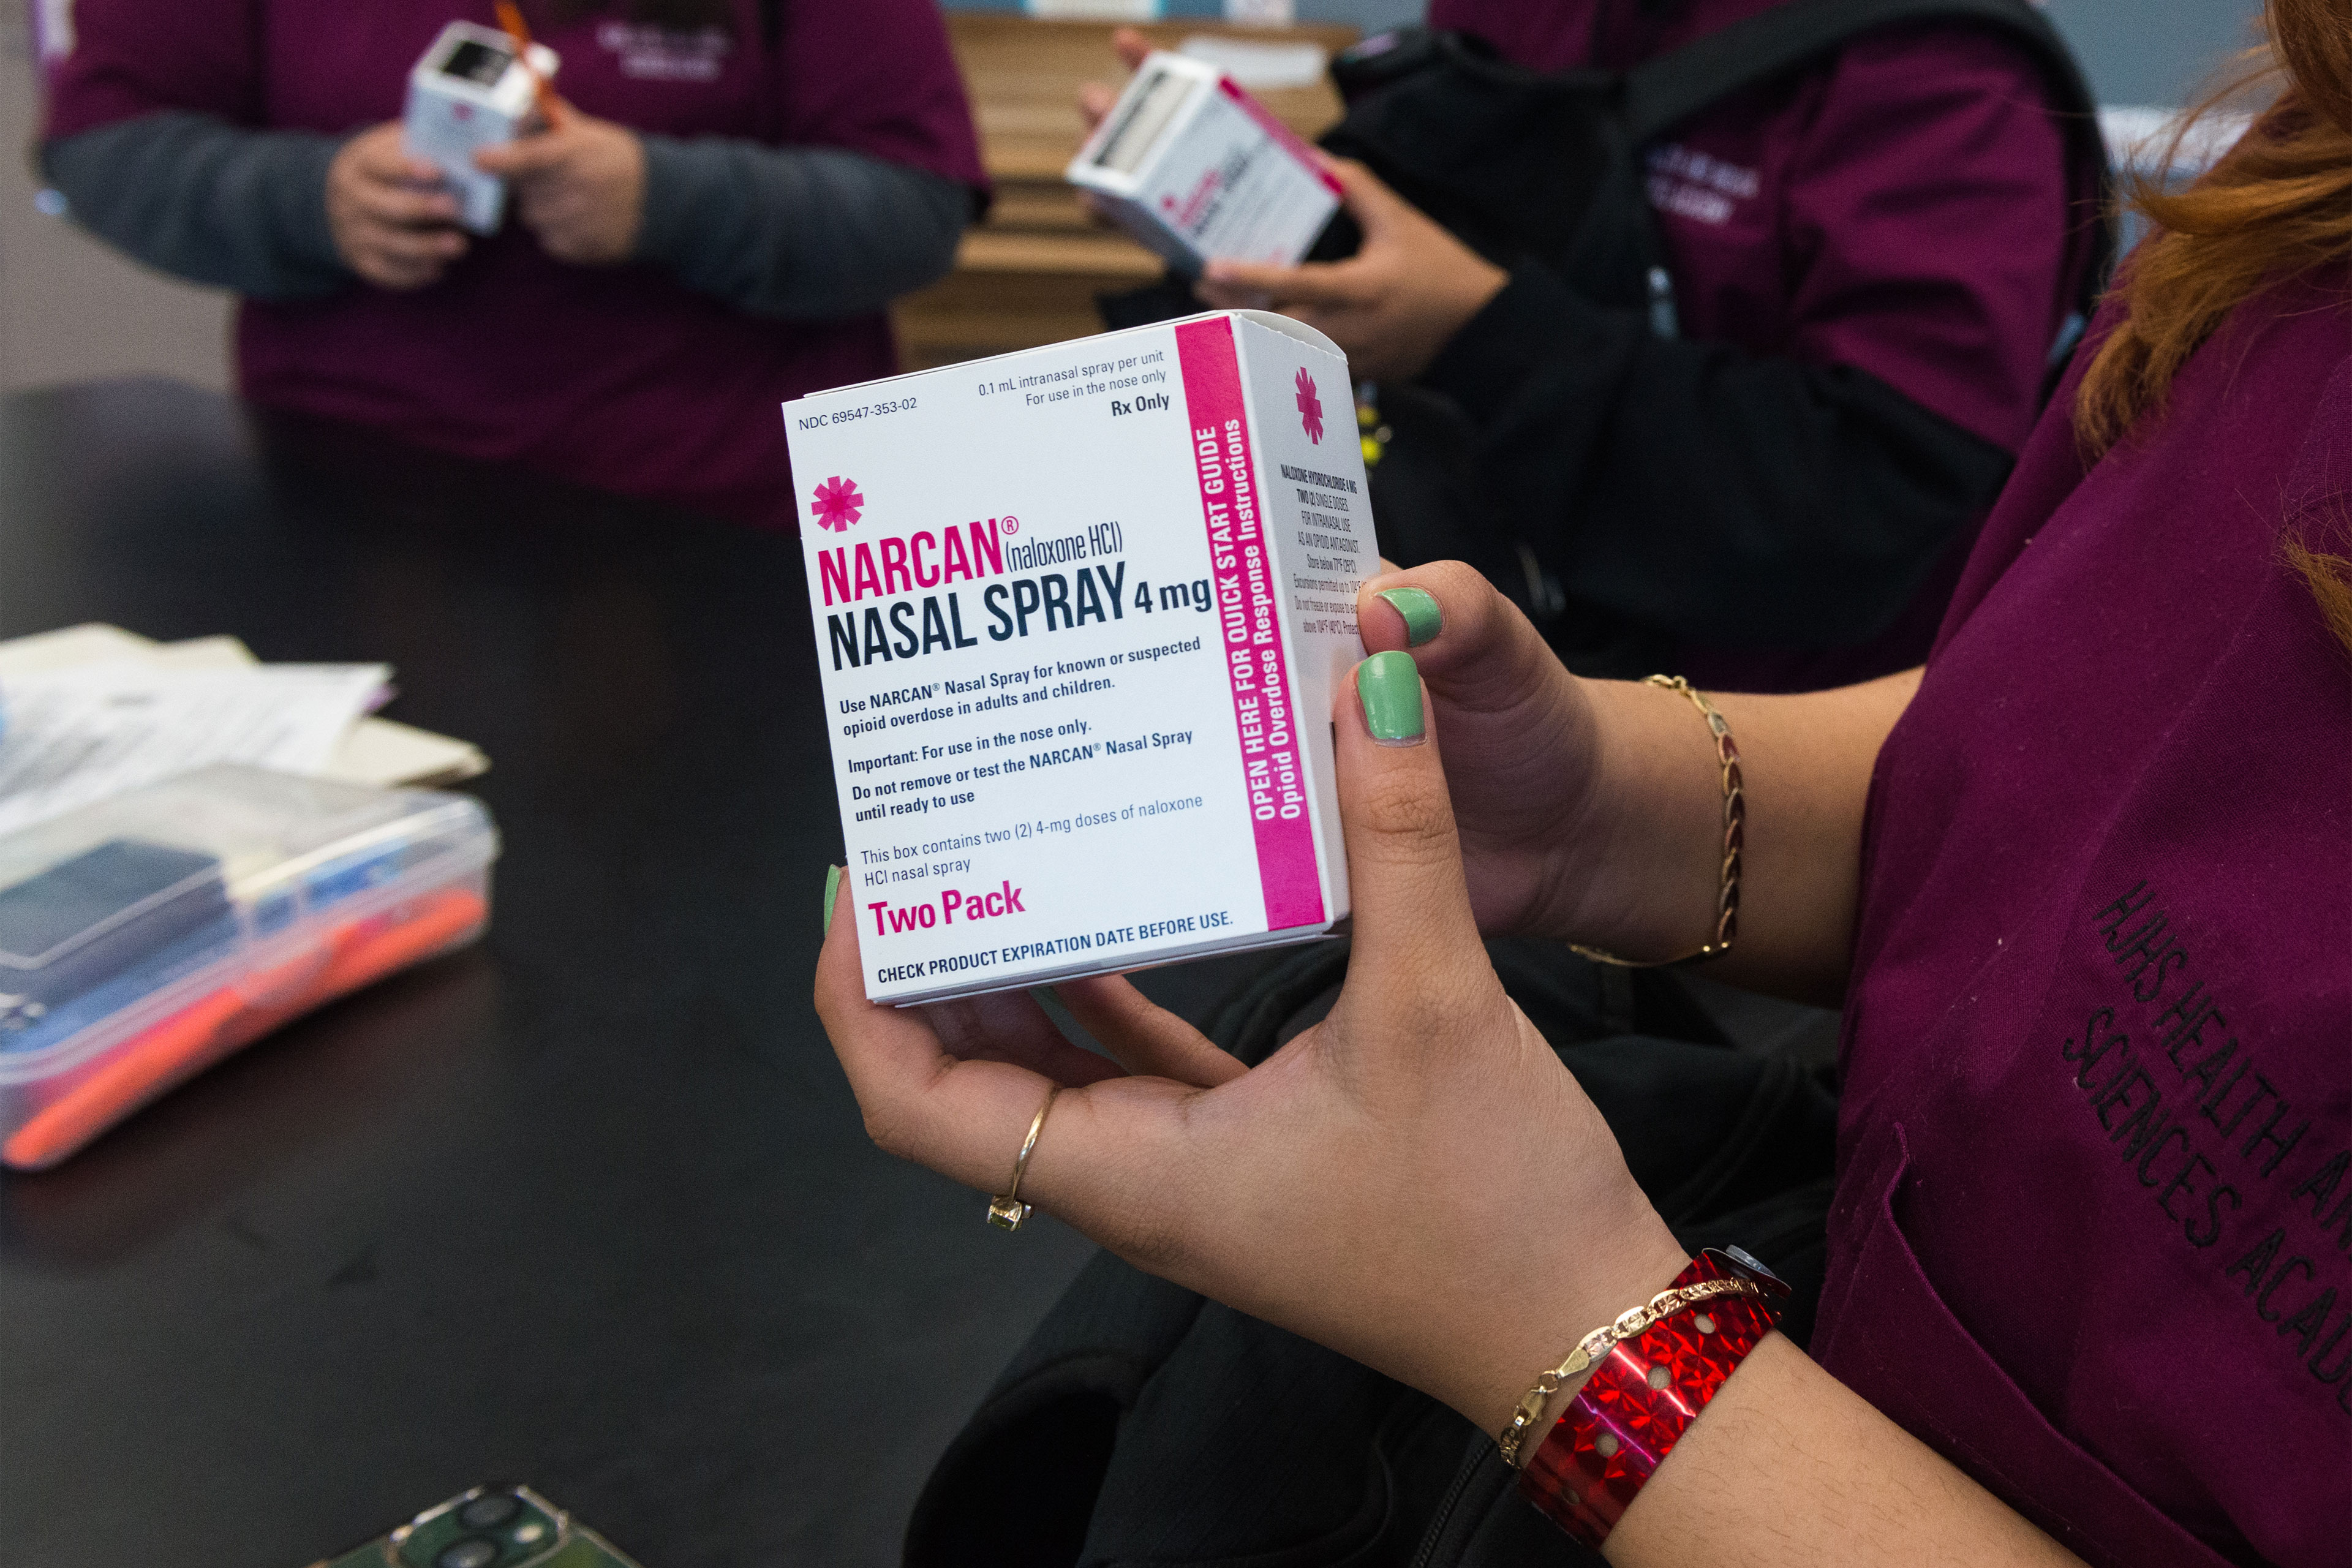 A close-up shot of someone holding a box labelled Narcan Nasal Spray.